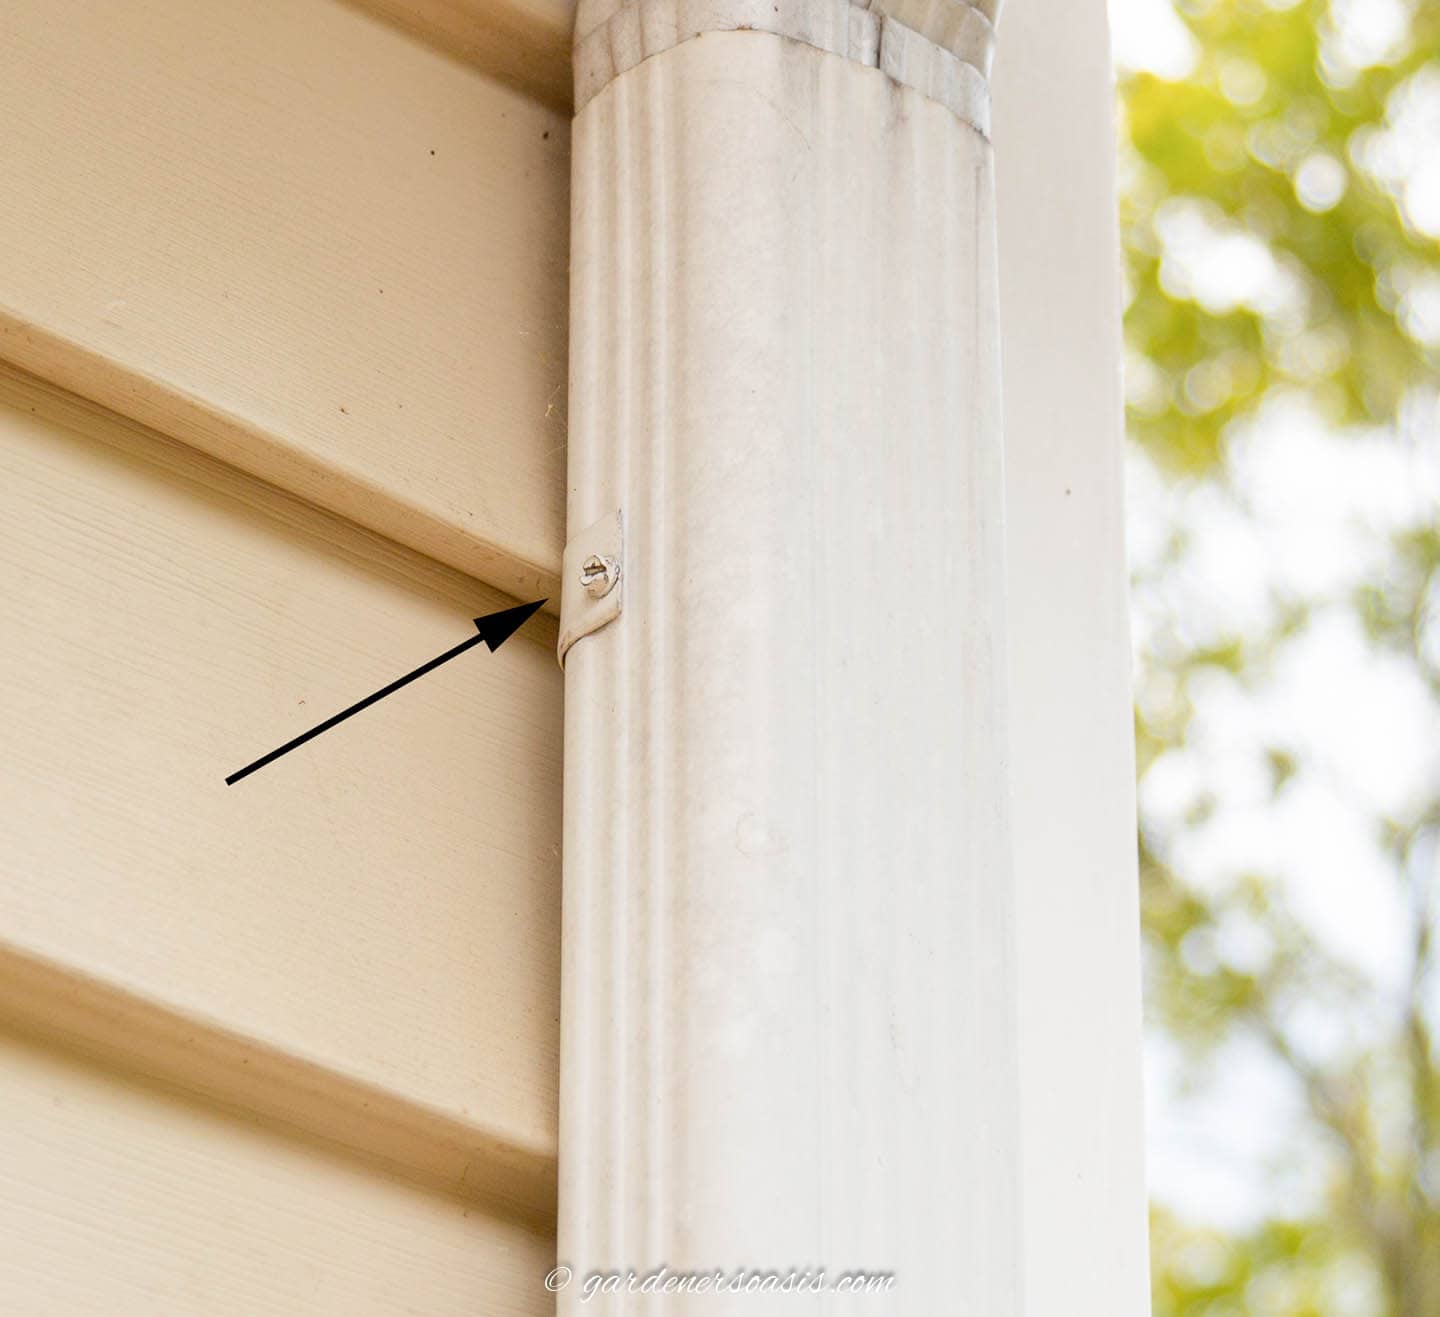 The bracket and screw holding a downspout to the house